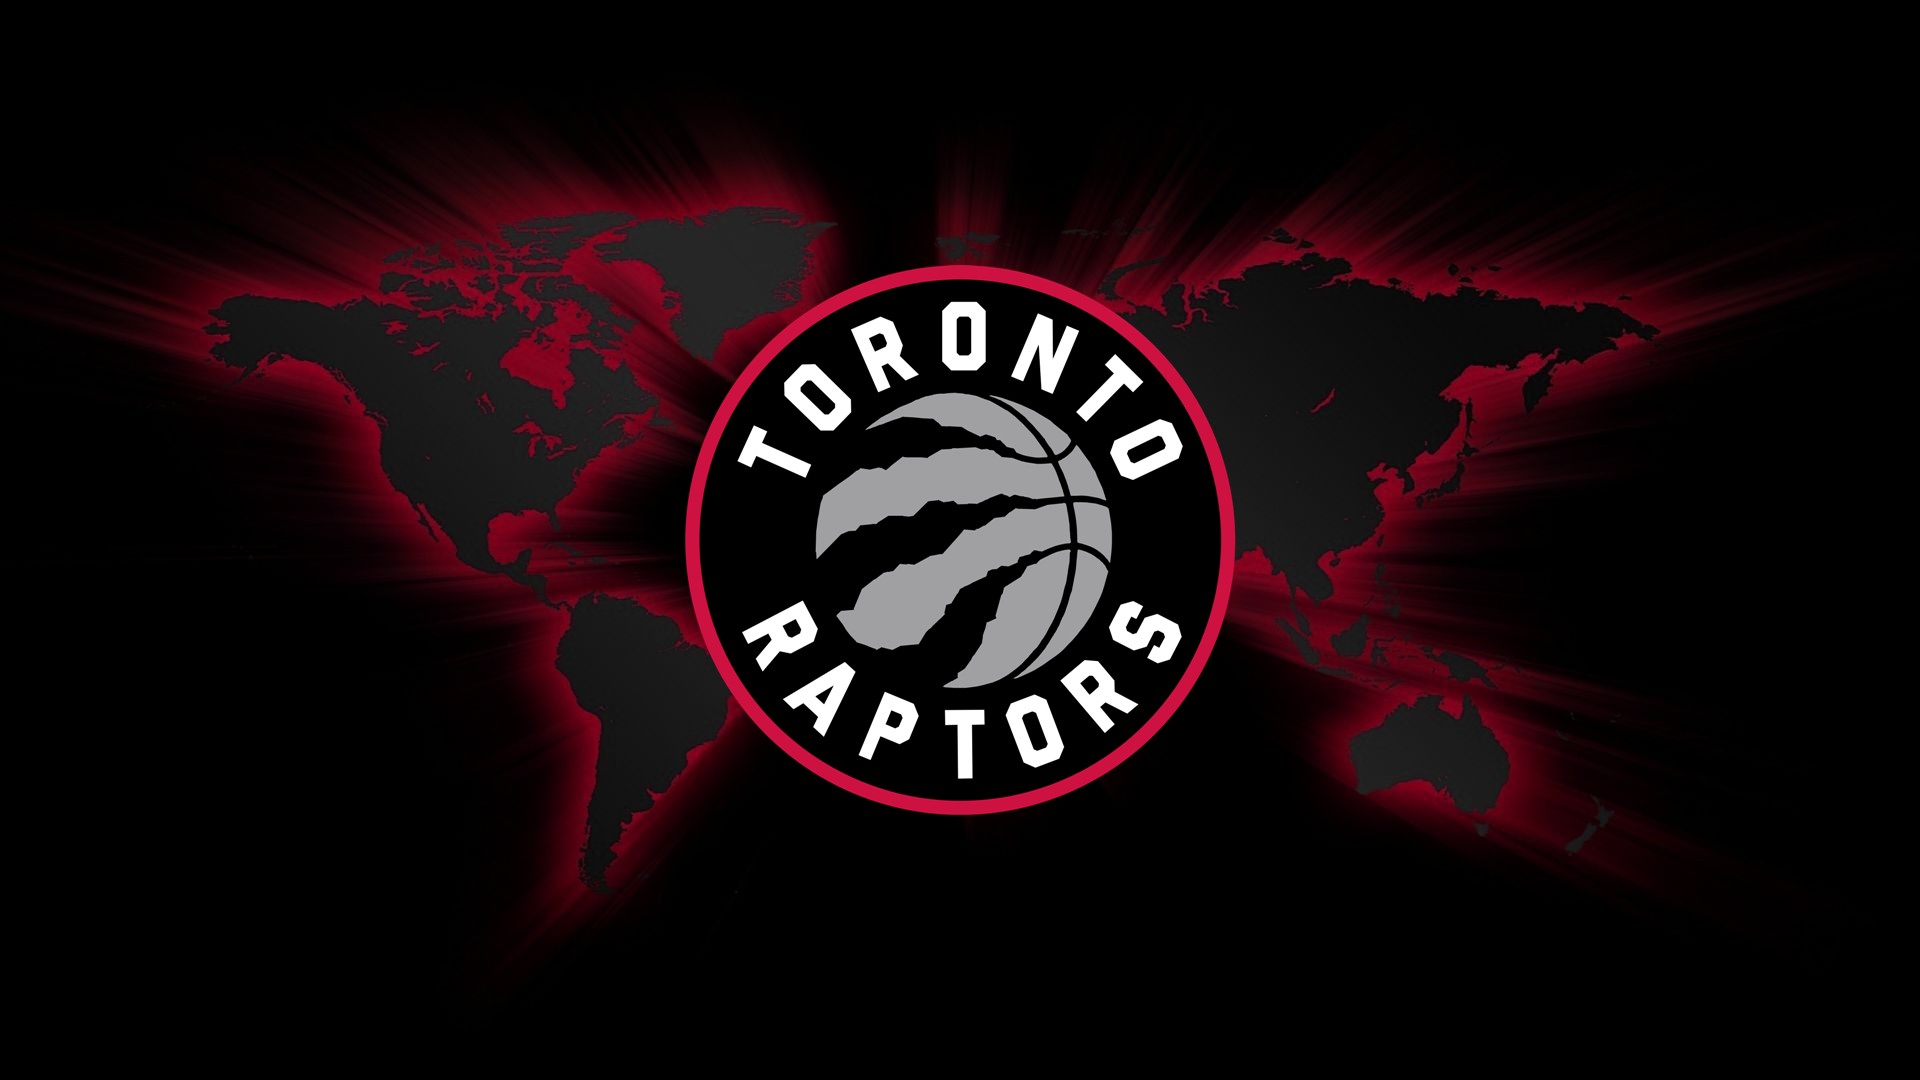 Basketball Toronto For Desktop Wallpaper with image dimensions 1920x1080 pixel. You can make this wallpaper for your Desktop Computer Backgrounds, Windows or Mac Screensavers, iPhone Lock screen, Tablet or Android and another Mobile Phone device